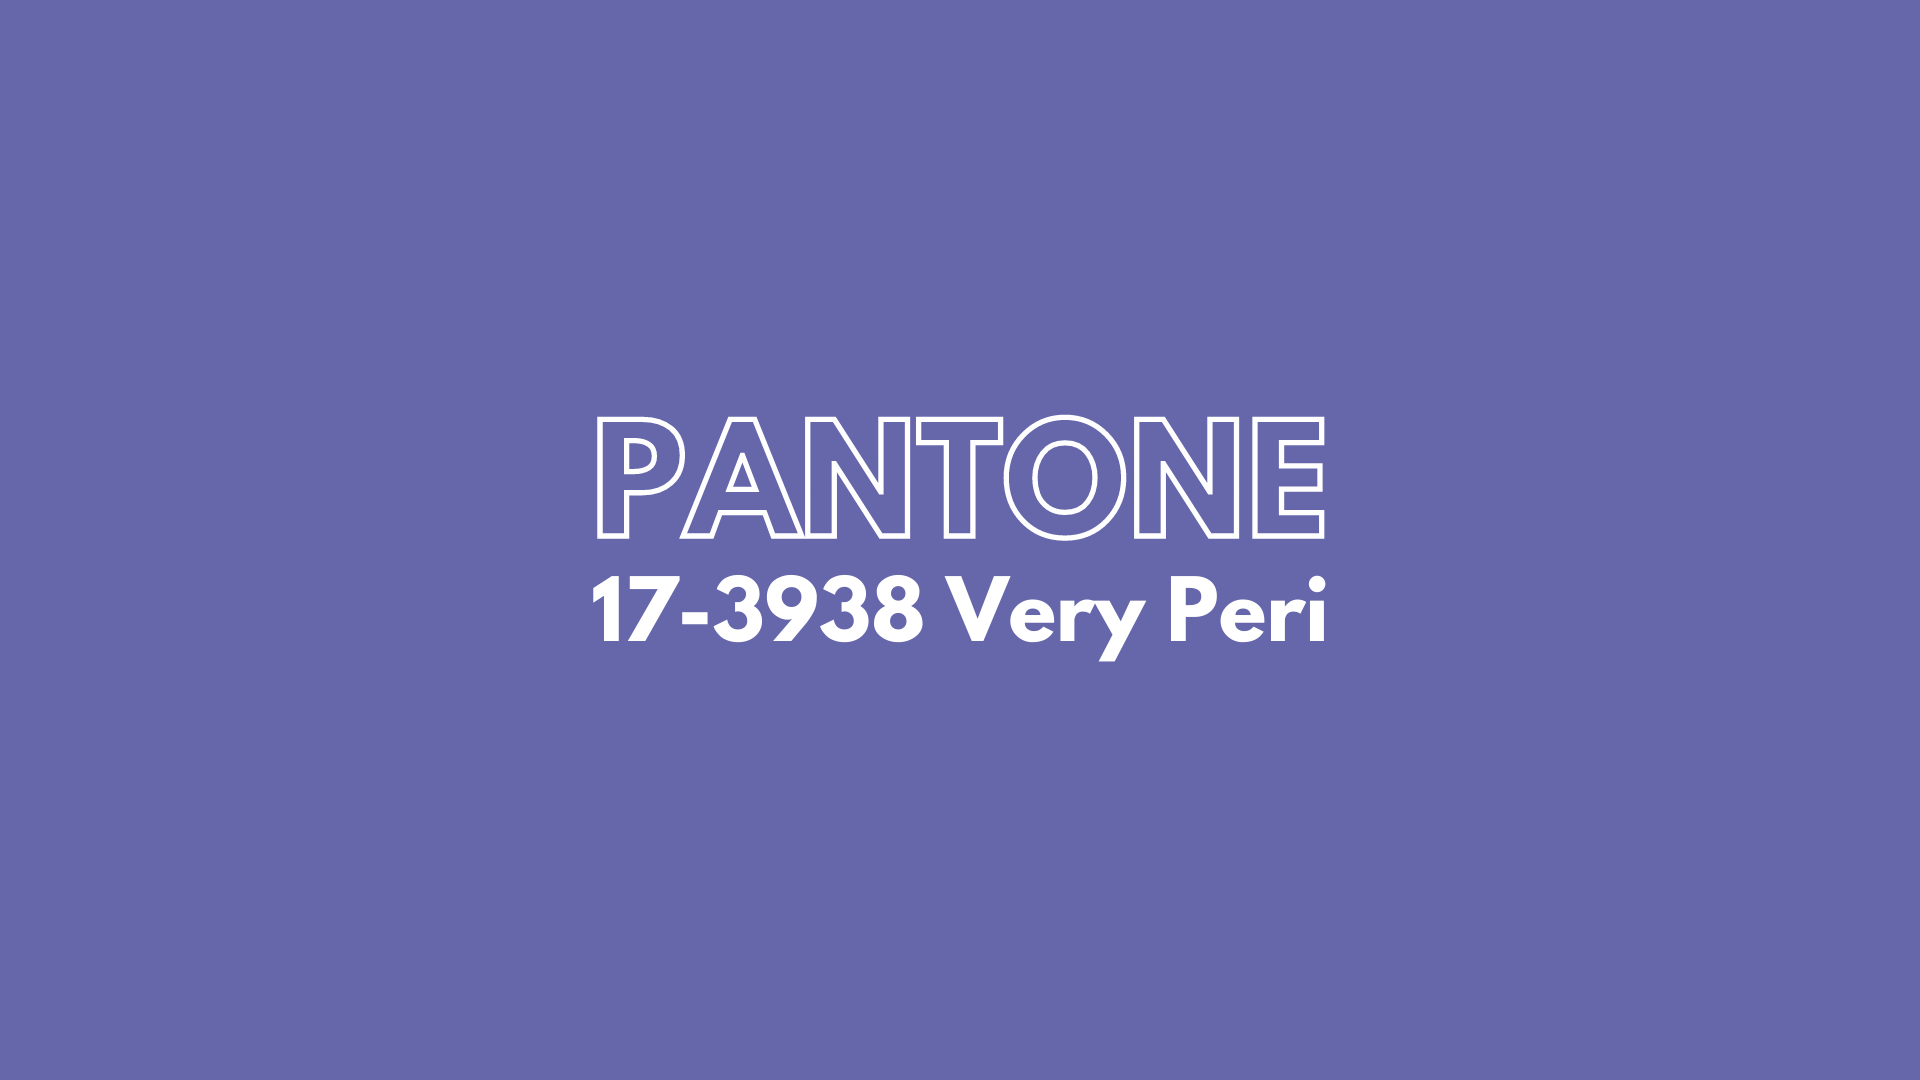 Very Peri: how will you use Pantone’s Colour of the Year 2022?